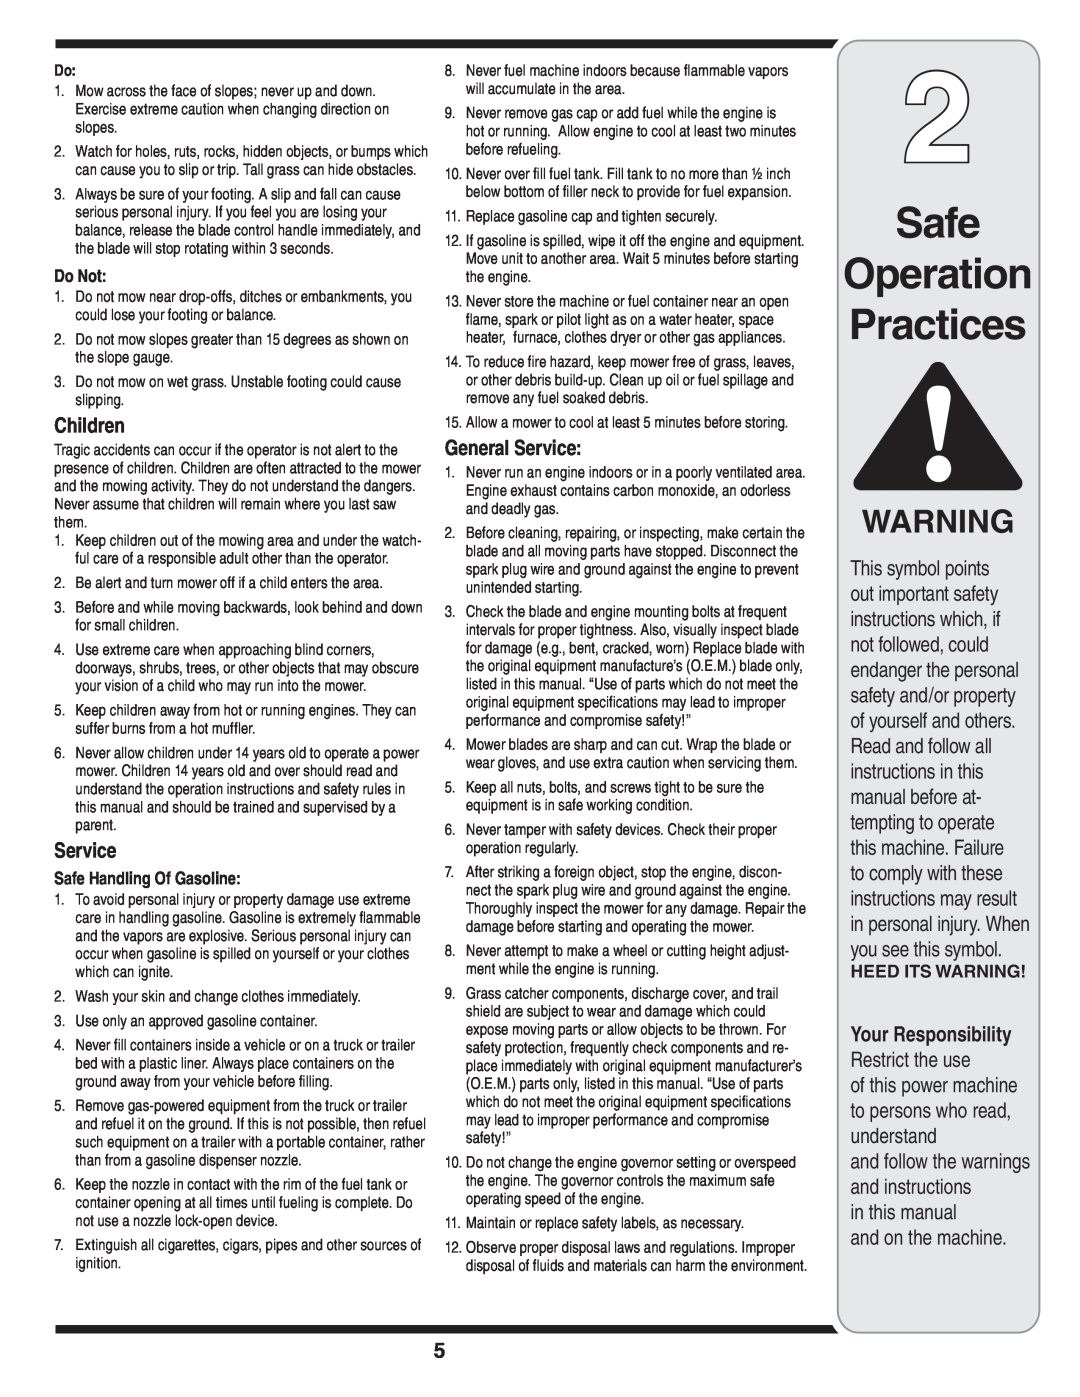 MTD 60-1622-0 warranty Safe Operation Practices, Children, General Service, and follow the warnings and instructions 